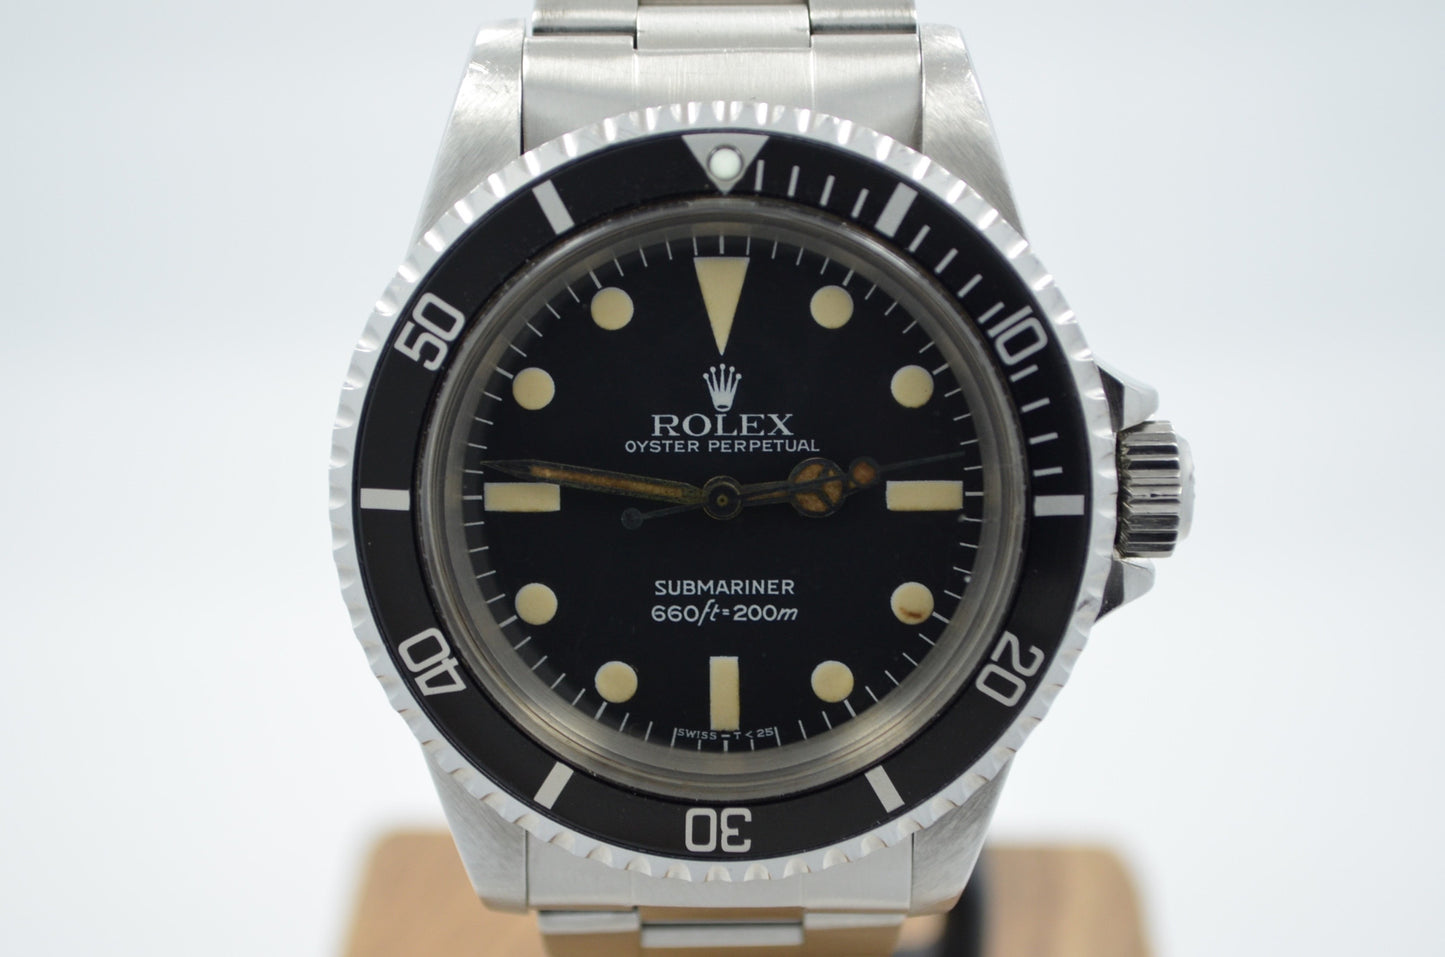 Vintage Rolex 5513 Submariner Stainless Steel 7.2 Mil Wristwatch 1981 Box Papers - Hashtag Watch Company